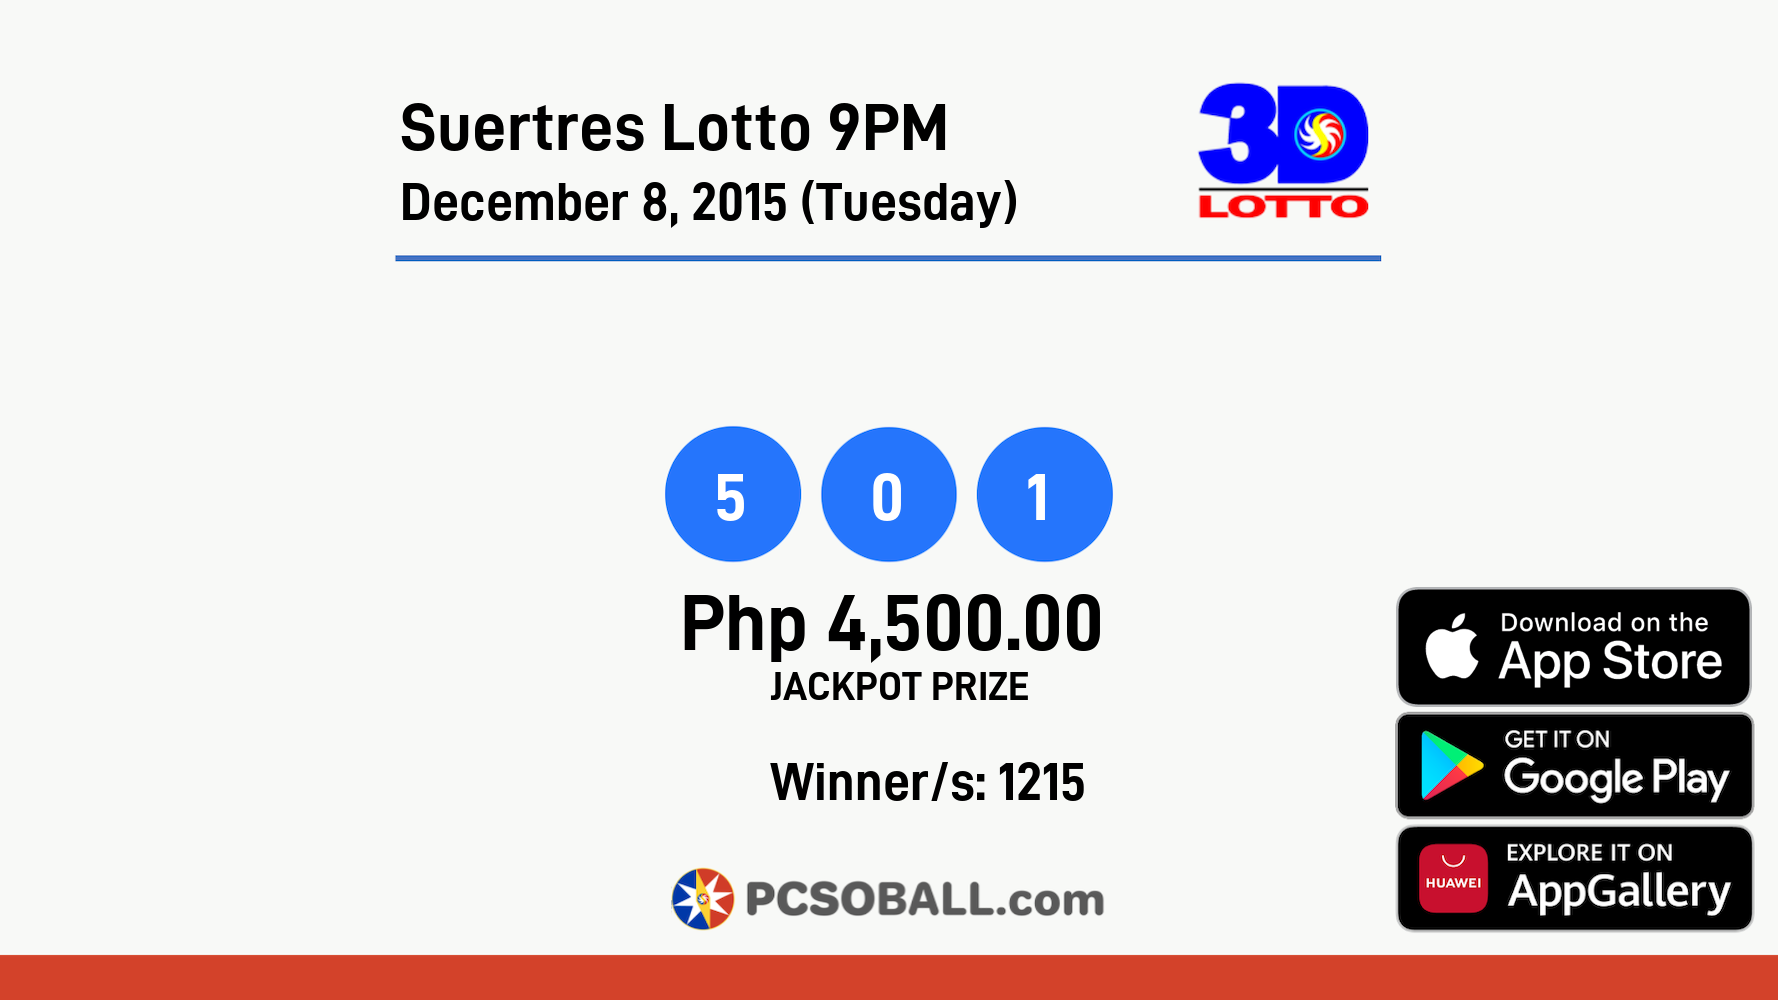 Suertres Lotto 9PM December 8, 2015 (Tuesday) Result